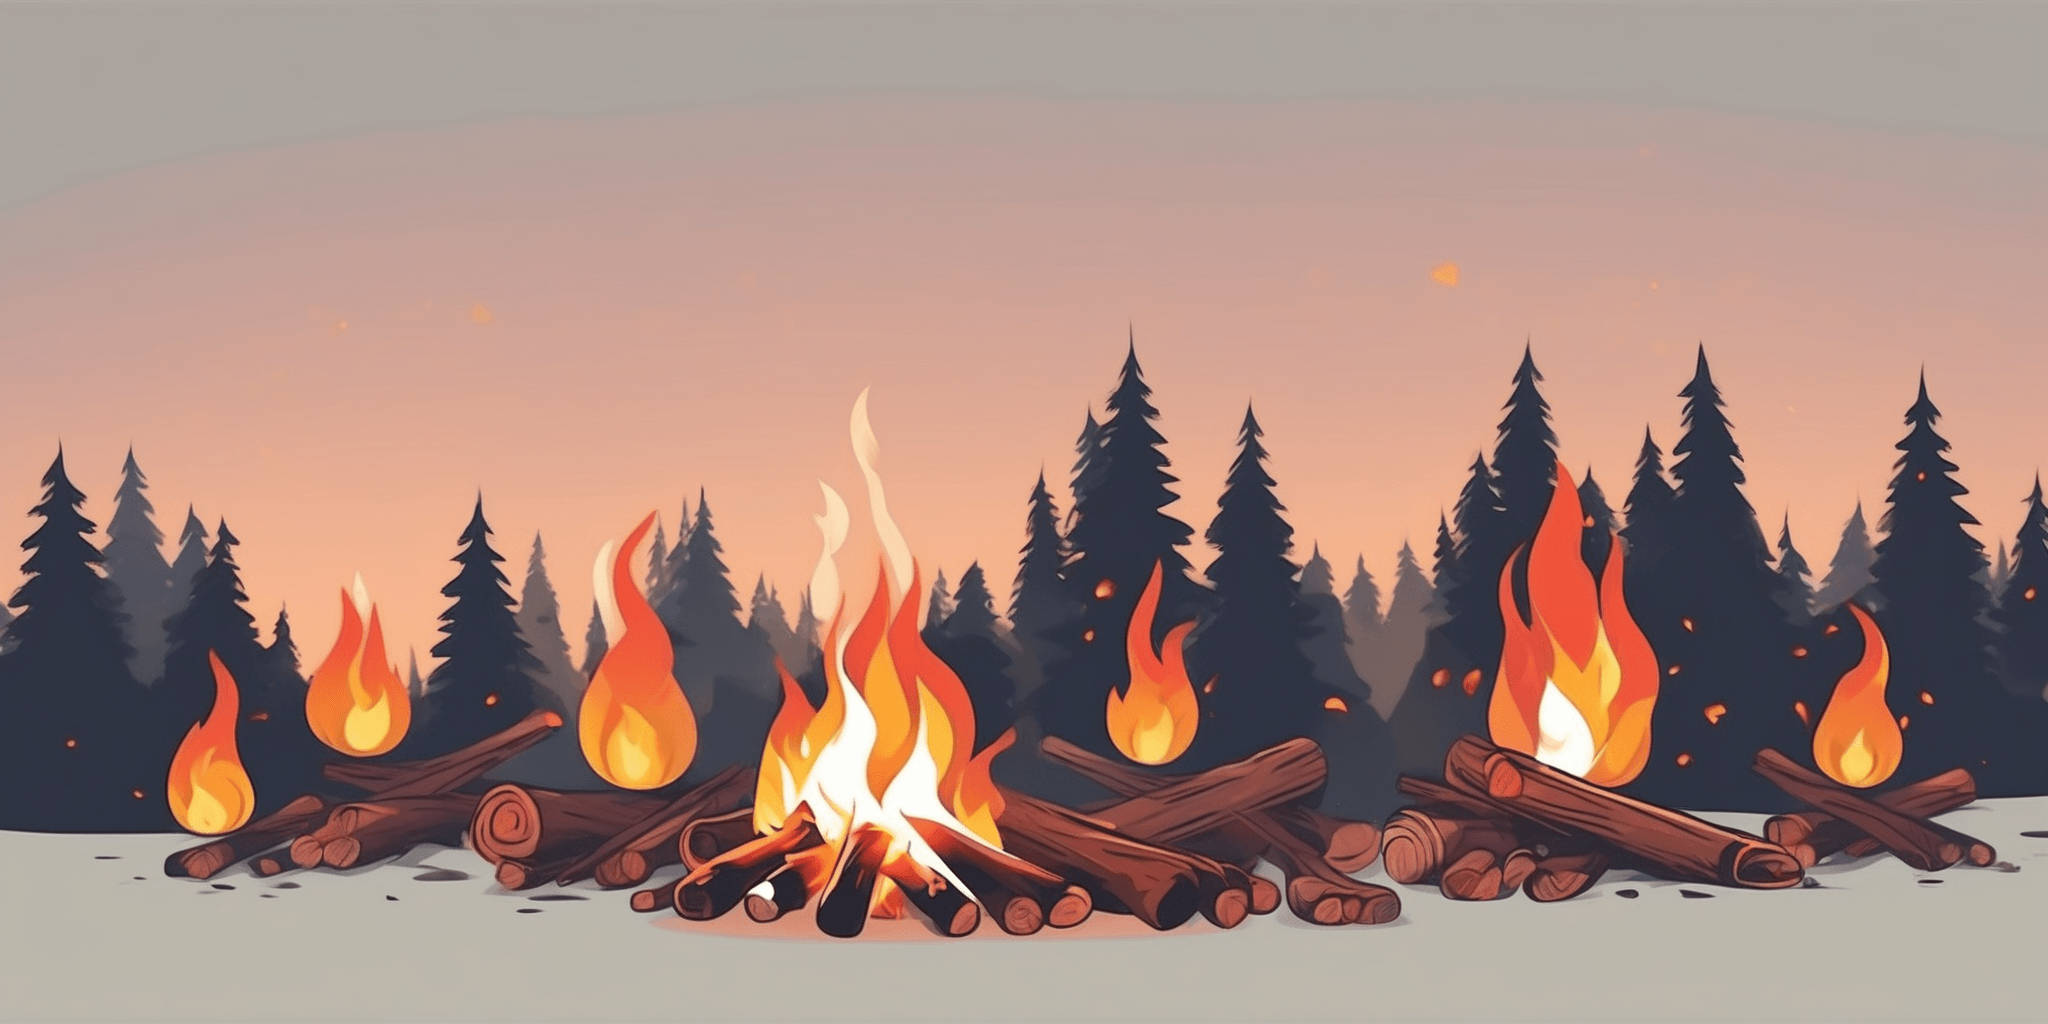 Campfire in illustration style with gradients and white background